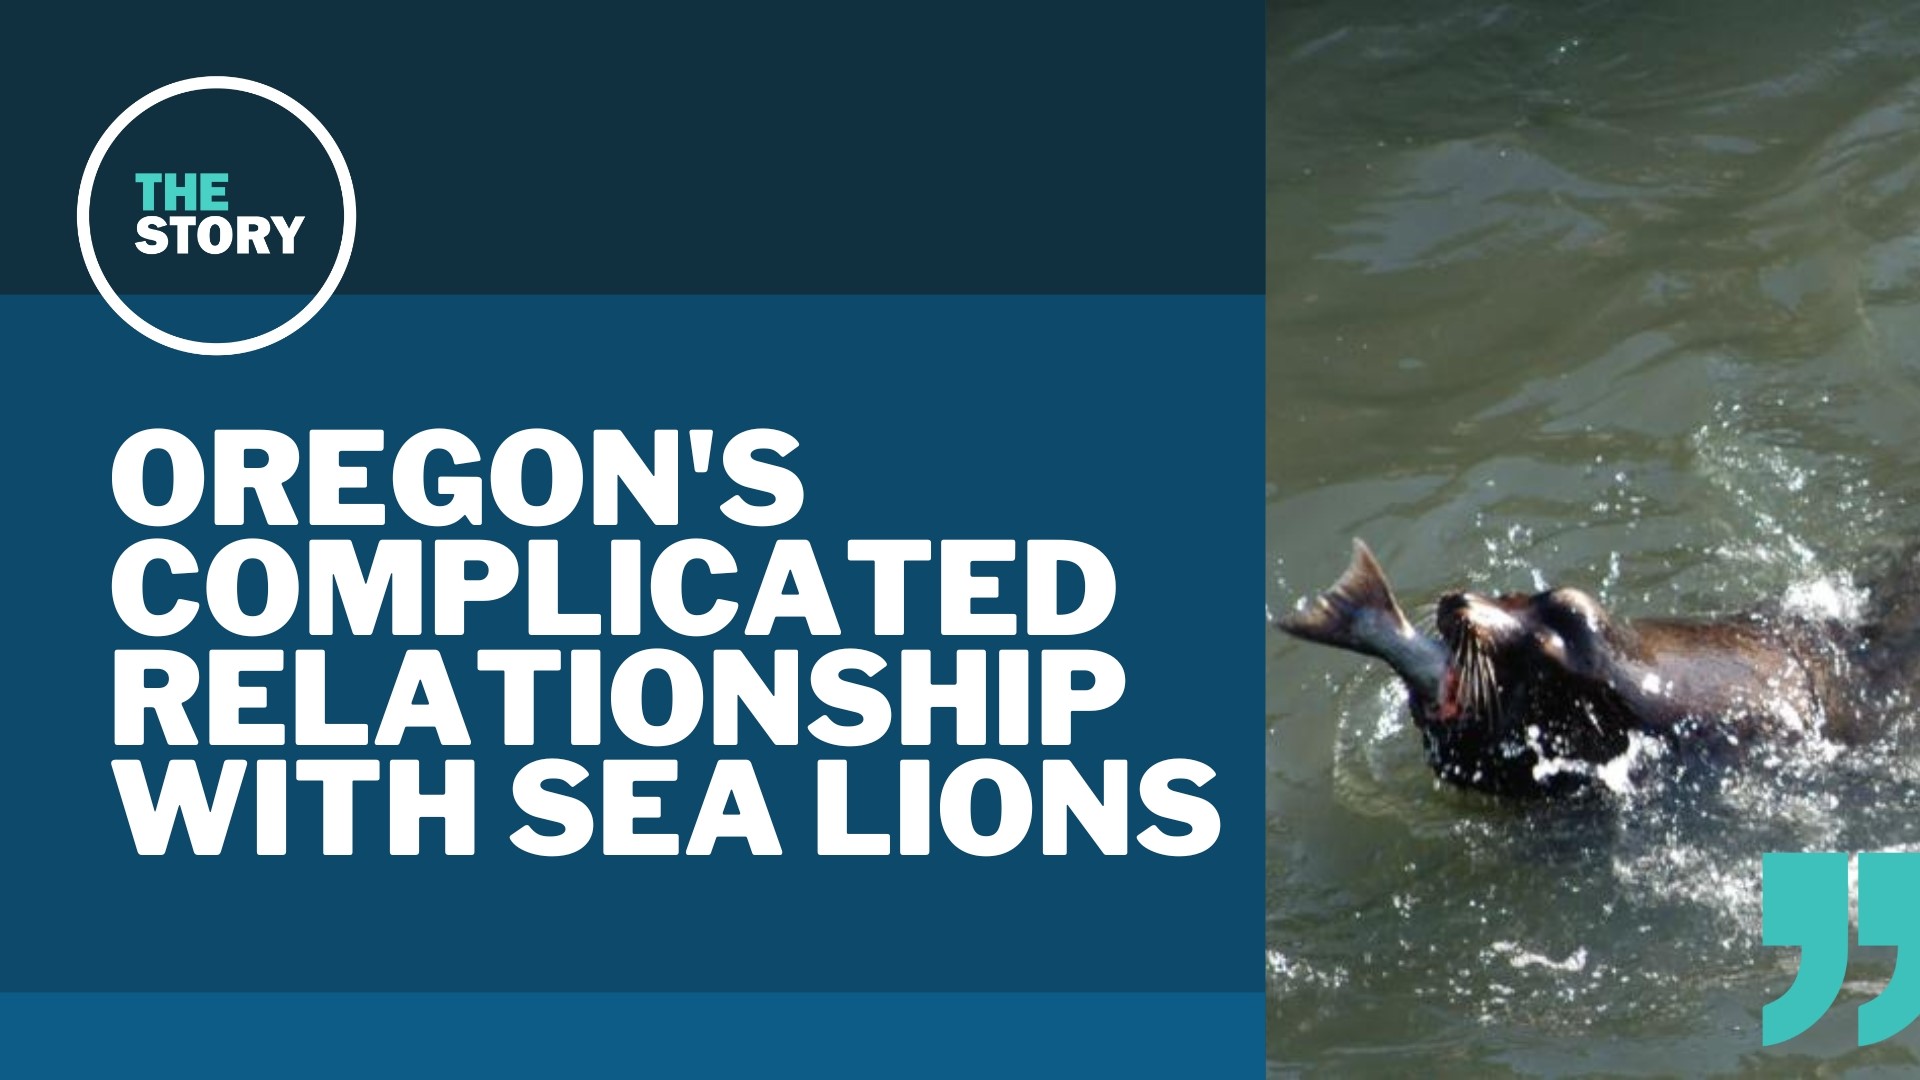 While sea lions are generally protected under federal law, their voracious appetite for salmon has resulted in the killing of nearly 400 of the animals in Oregon.